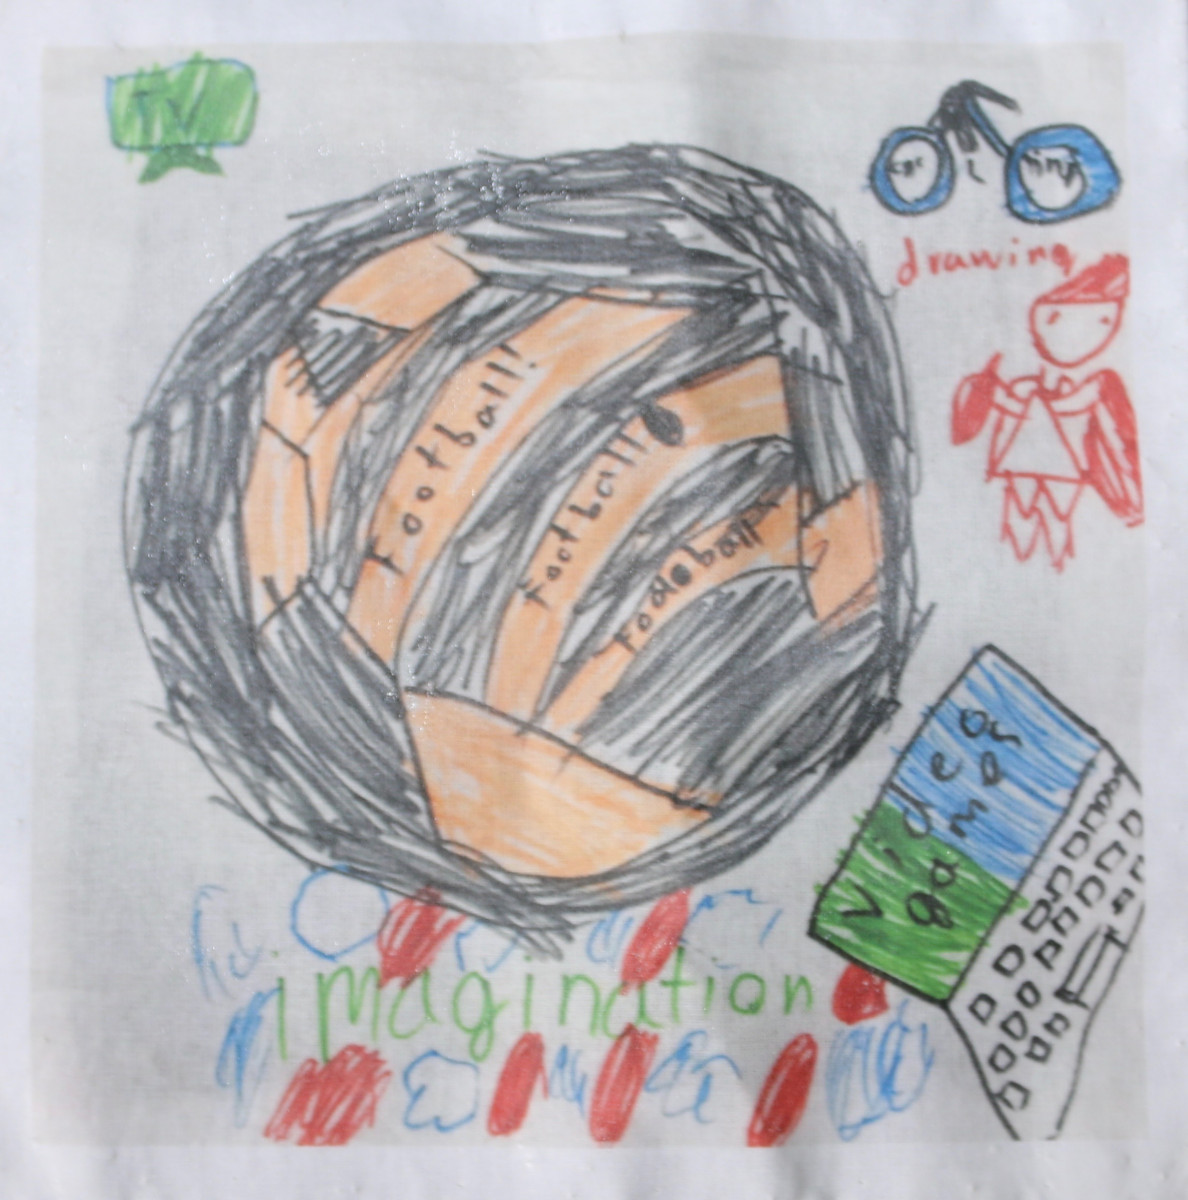 Child's drawing of football, bicycle, computer, TV